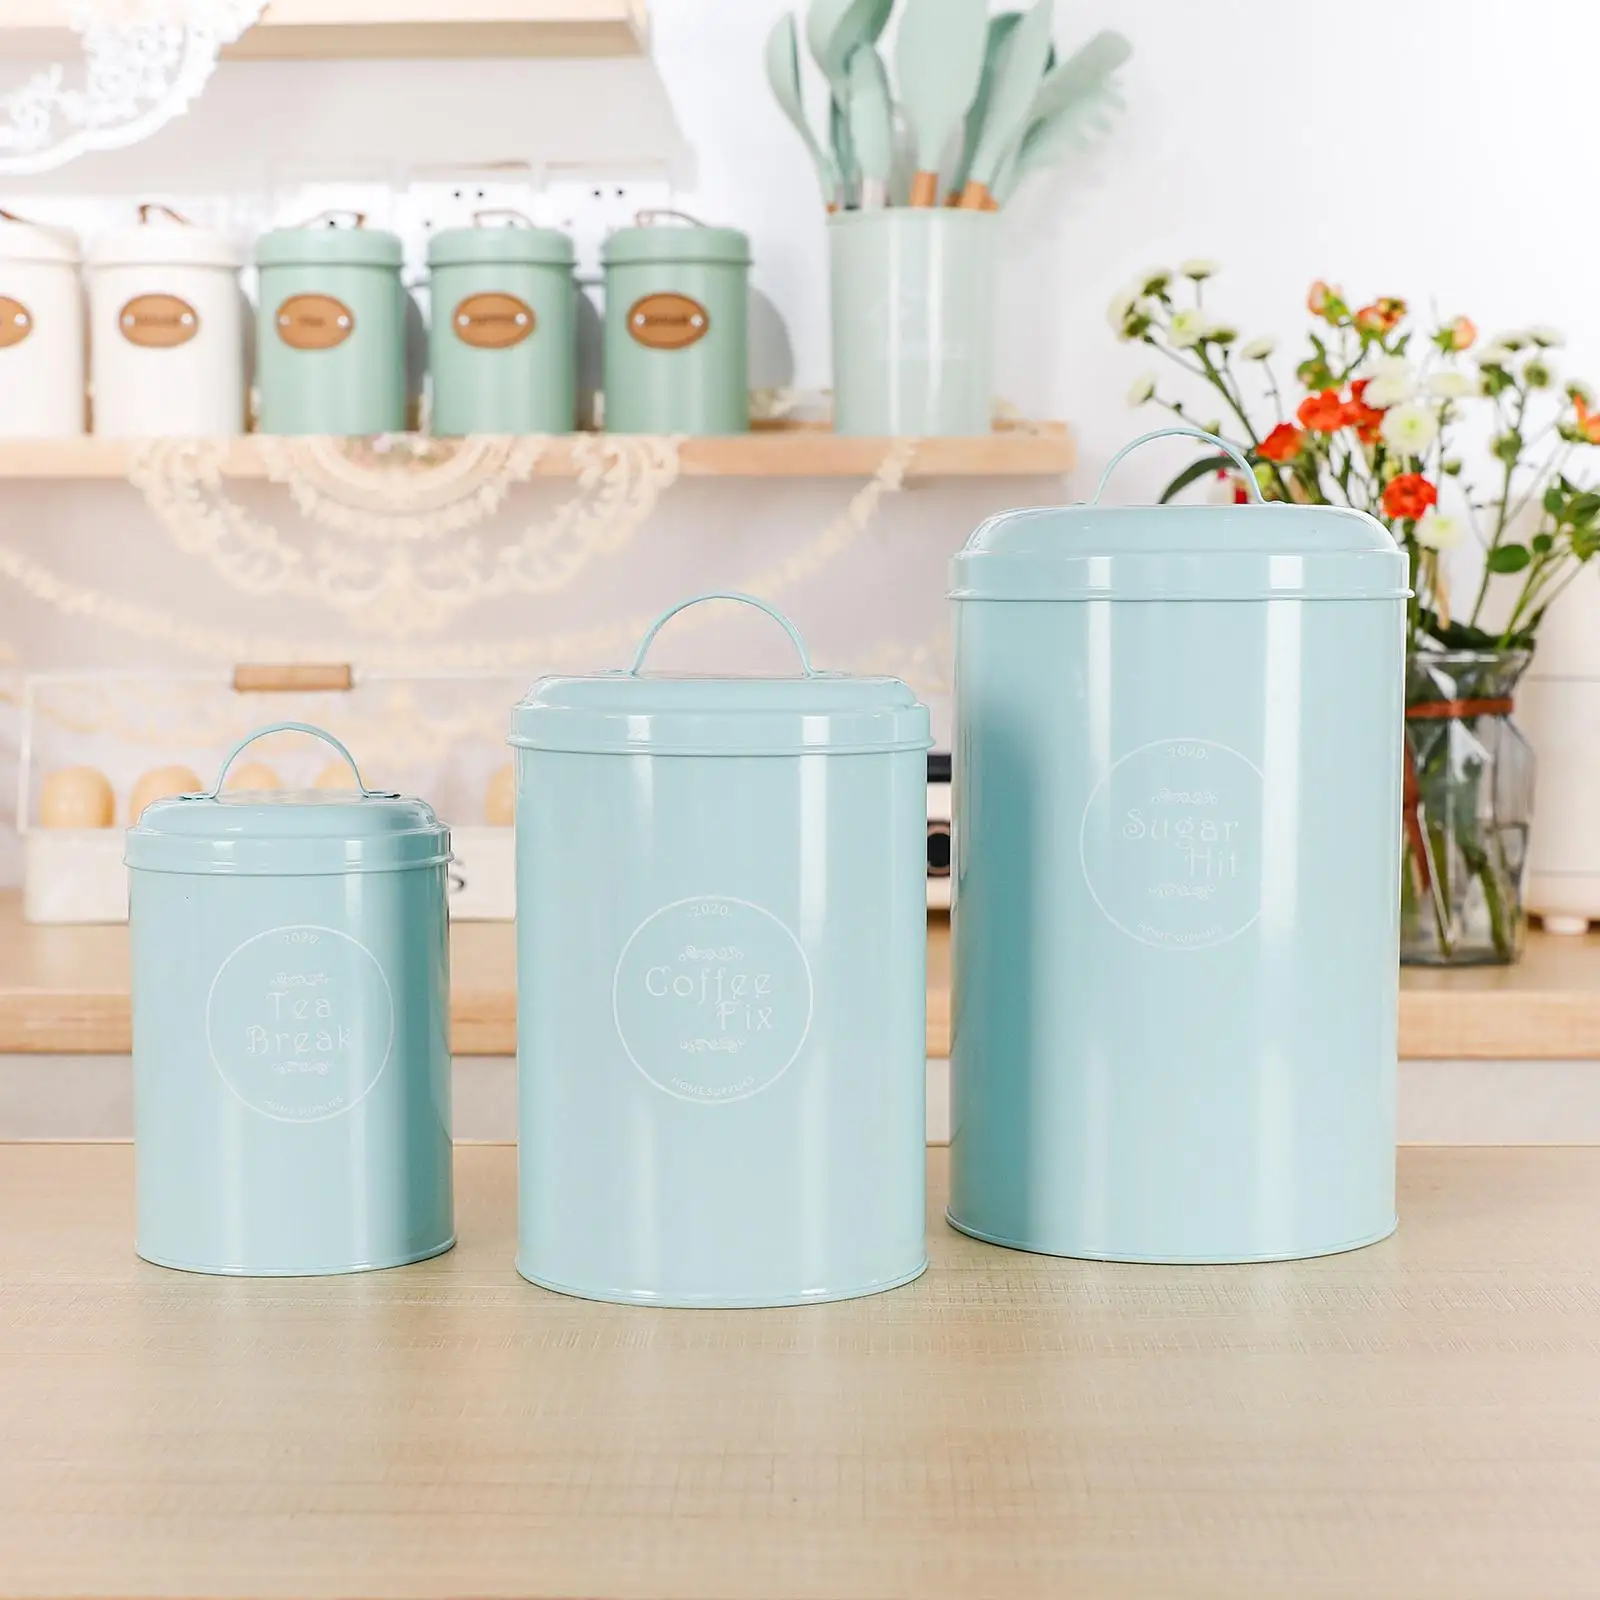 3Pcs Metal Coffee Sugar Storage Pots Jars Container Kitchen Food Storage Iron Candy Sealed Cans Box